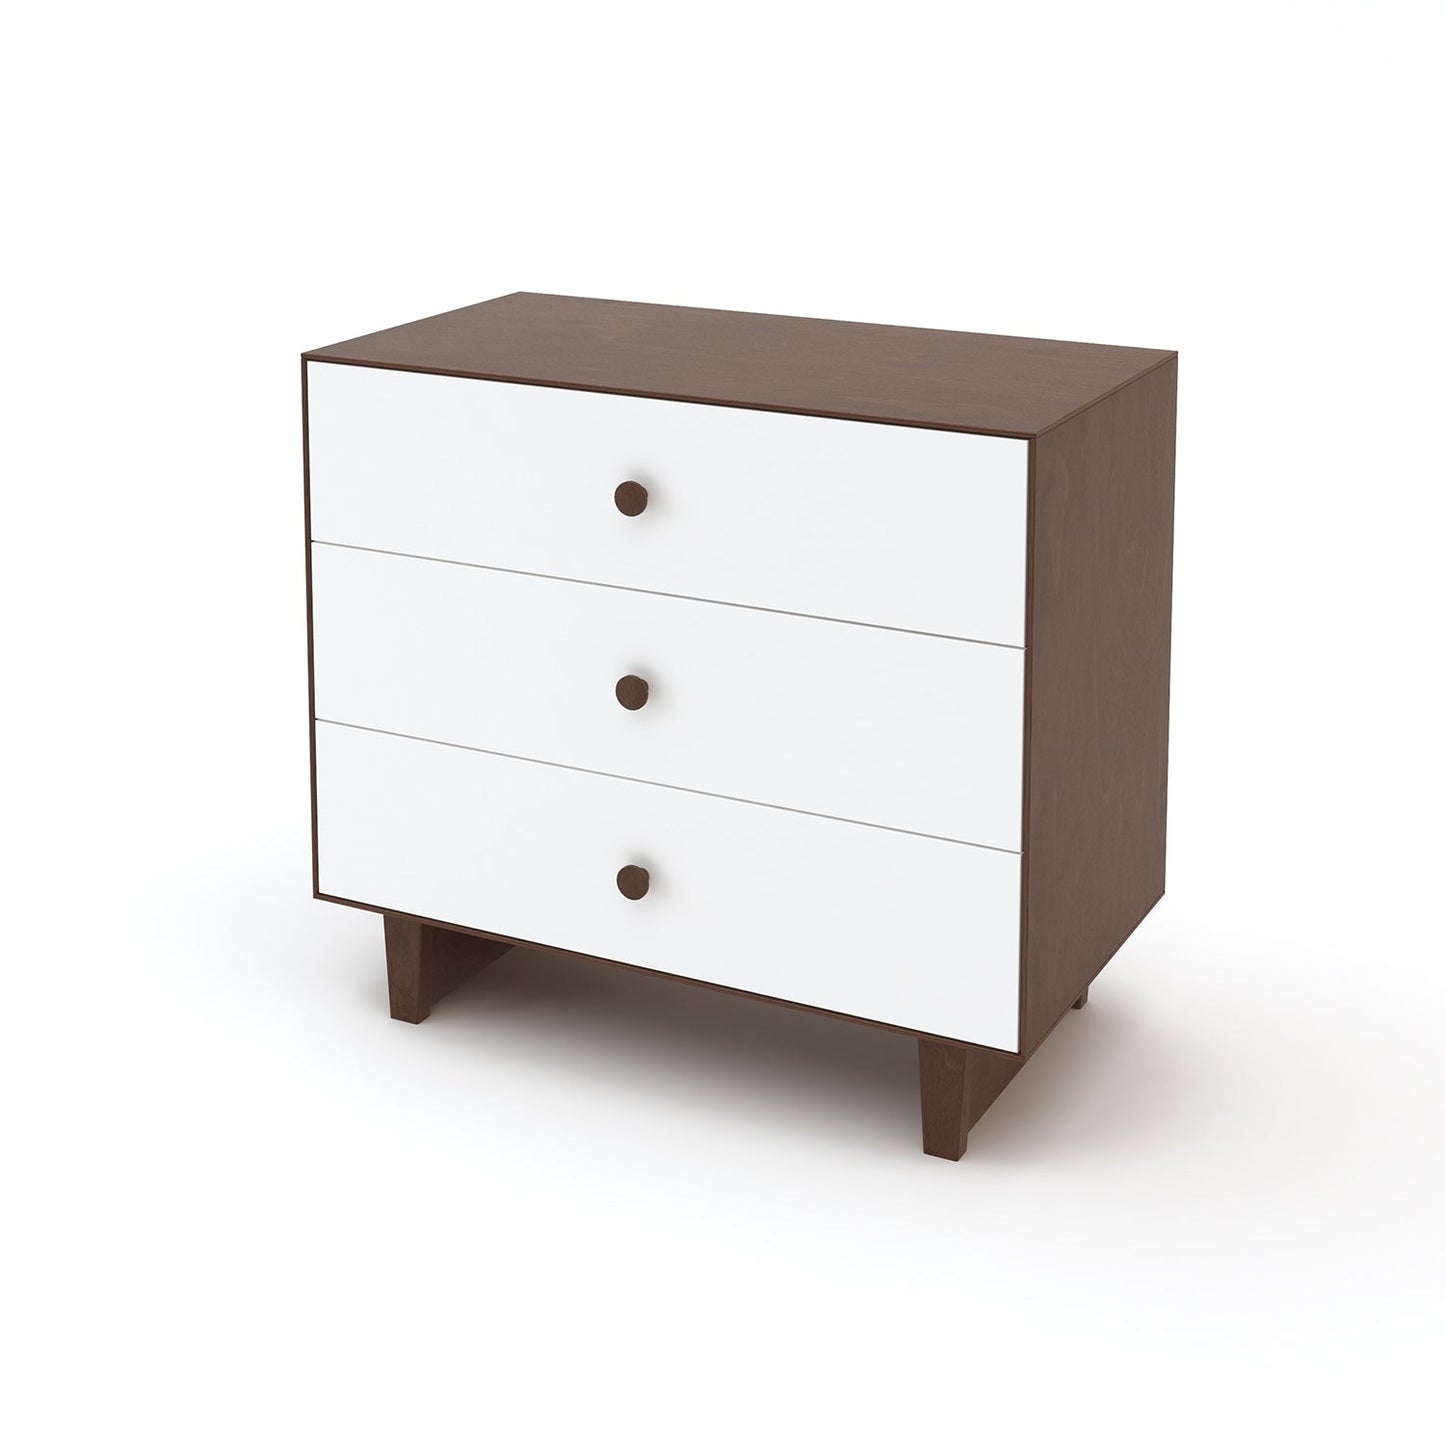 Oeuf NYC Merlin 3 Drawer Dresser - Rhea Legs (3 Colours Available)